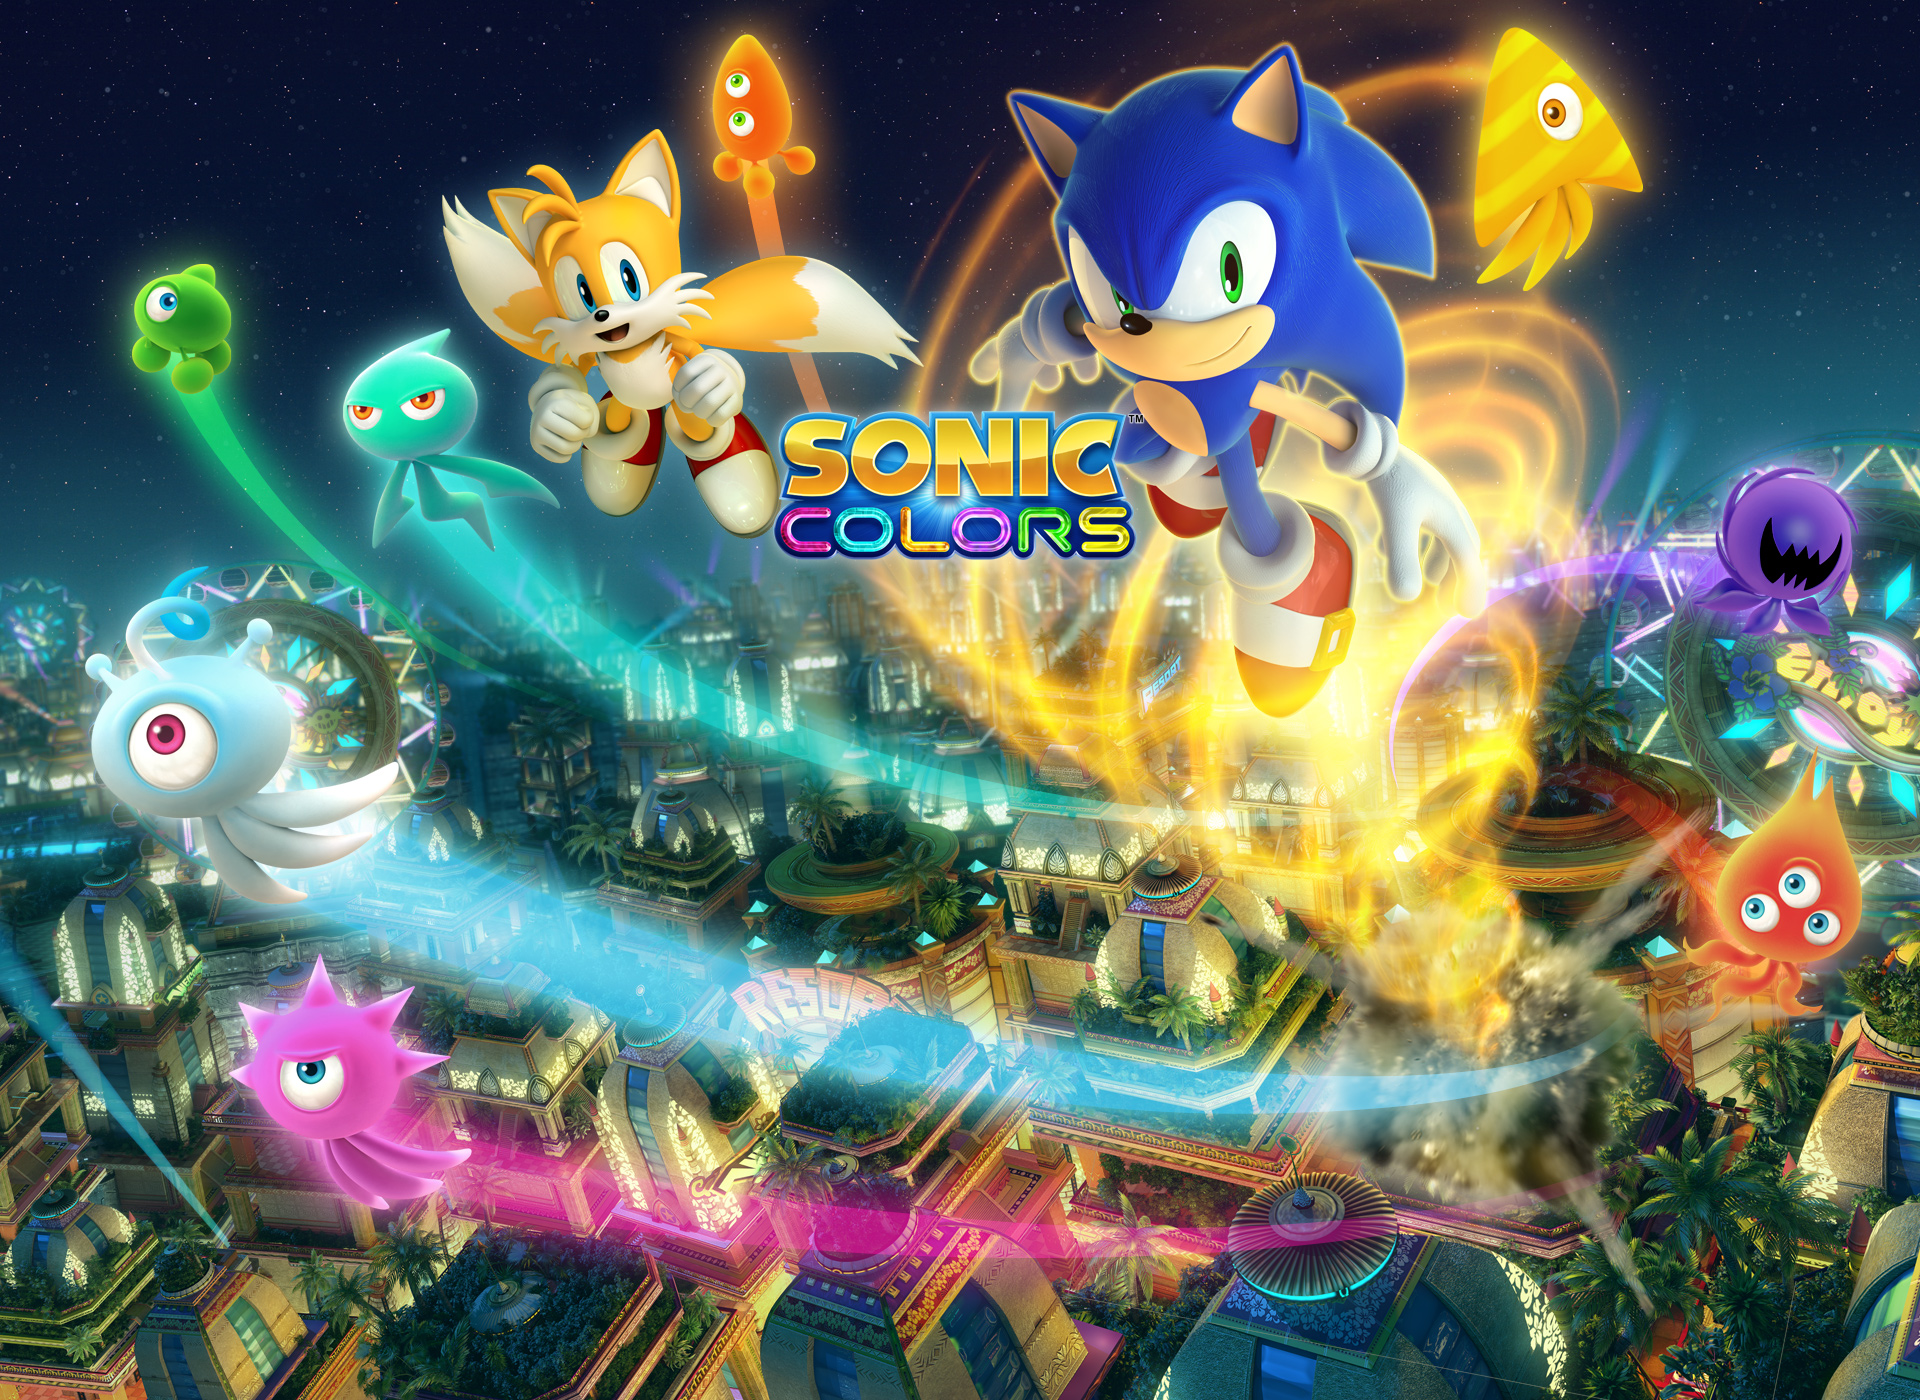 Sonic the Hedgehog Shadow the Hedgehog Sonic Colors Sonic Riders Sonic and  the Black Knight Sonic blue sonic The Hedgehog computer Wallpaper png   PNGWing